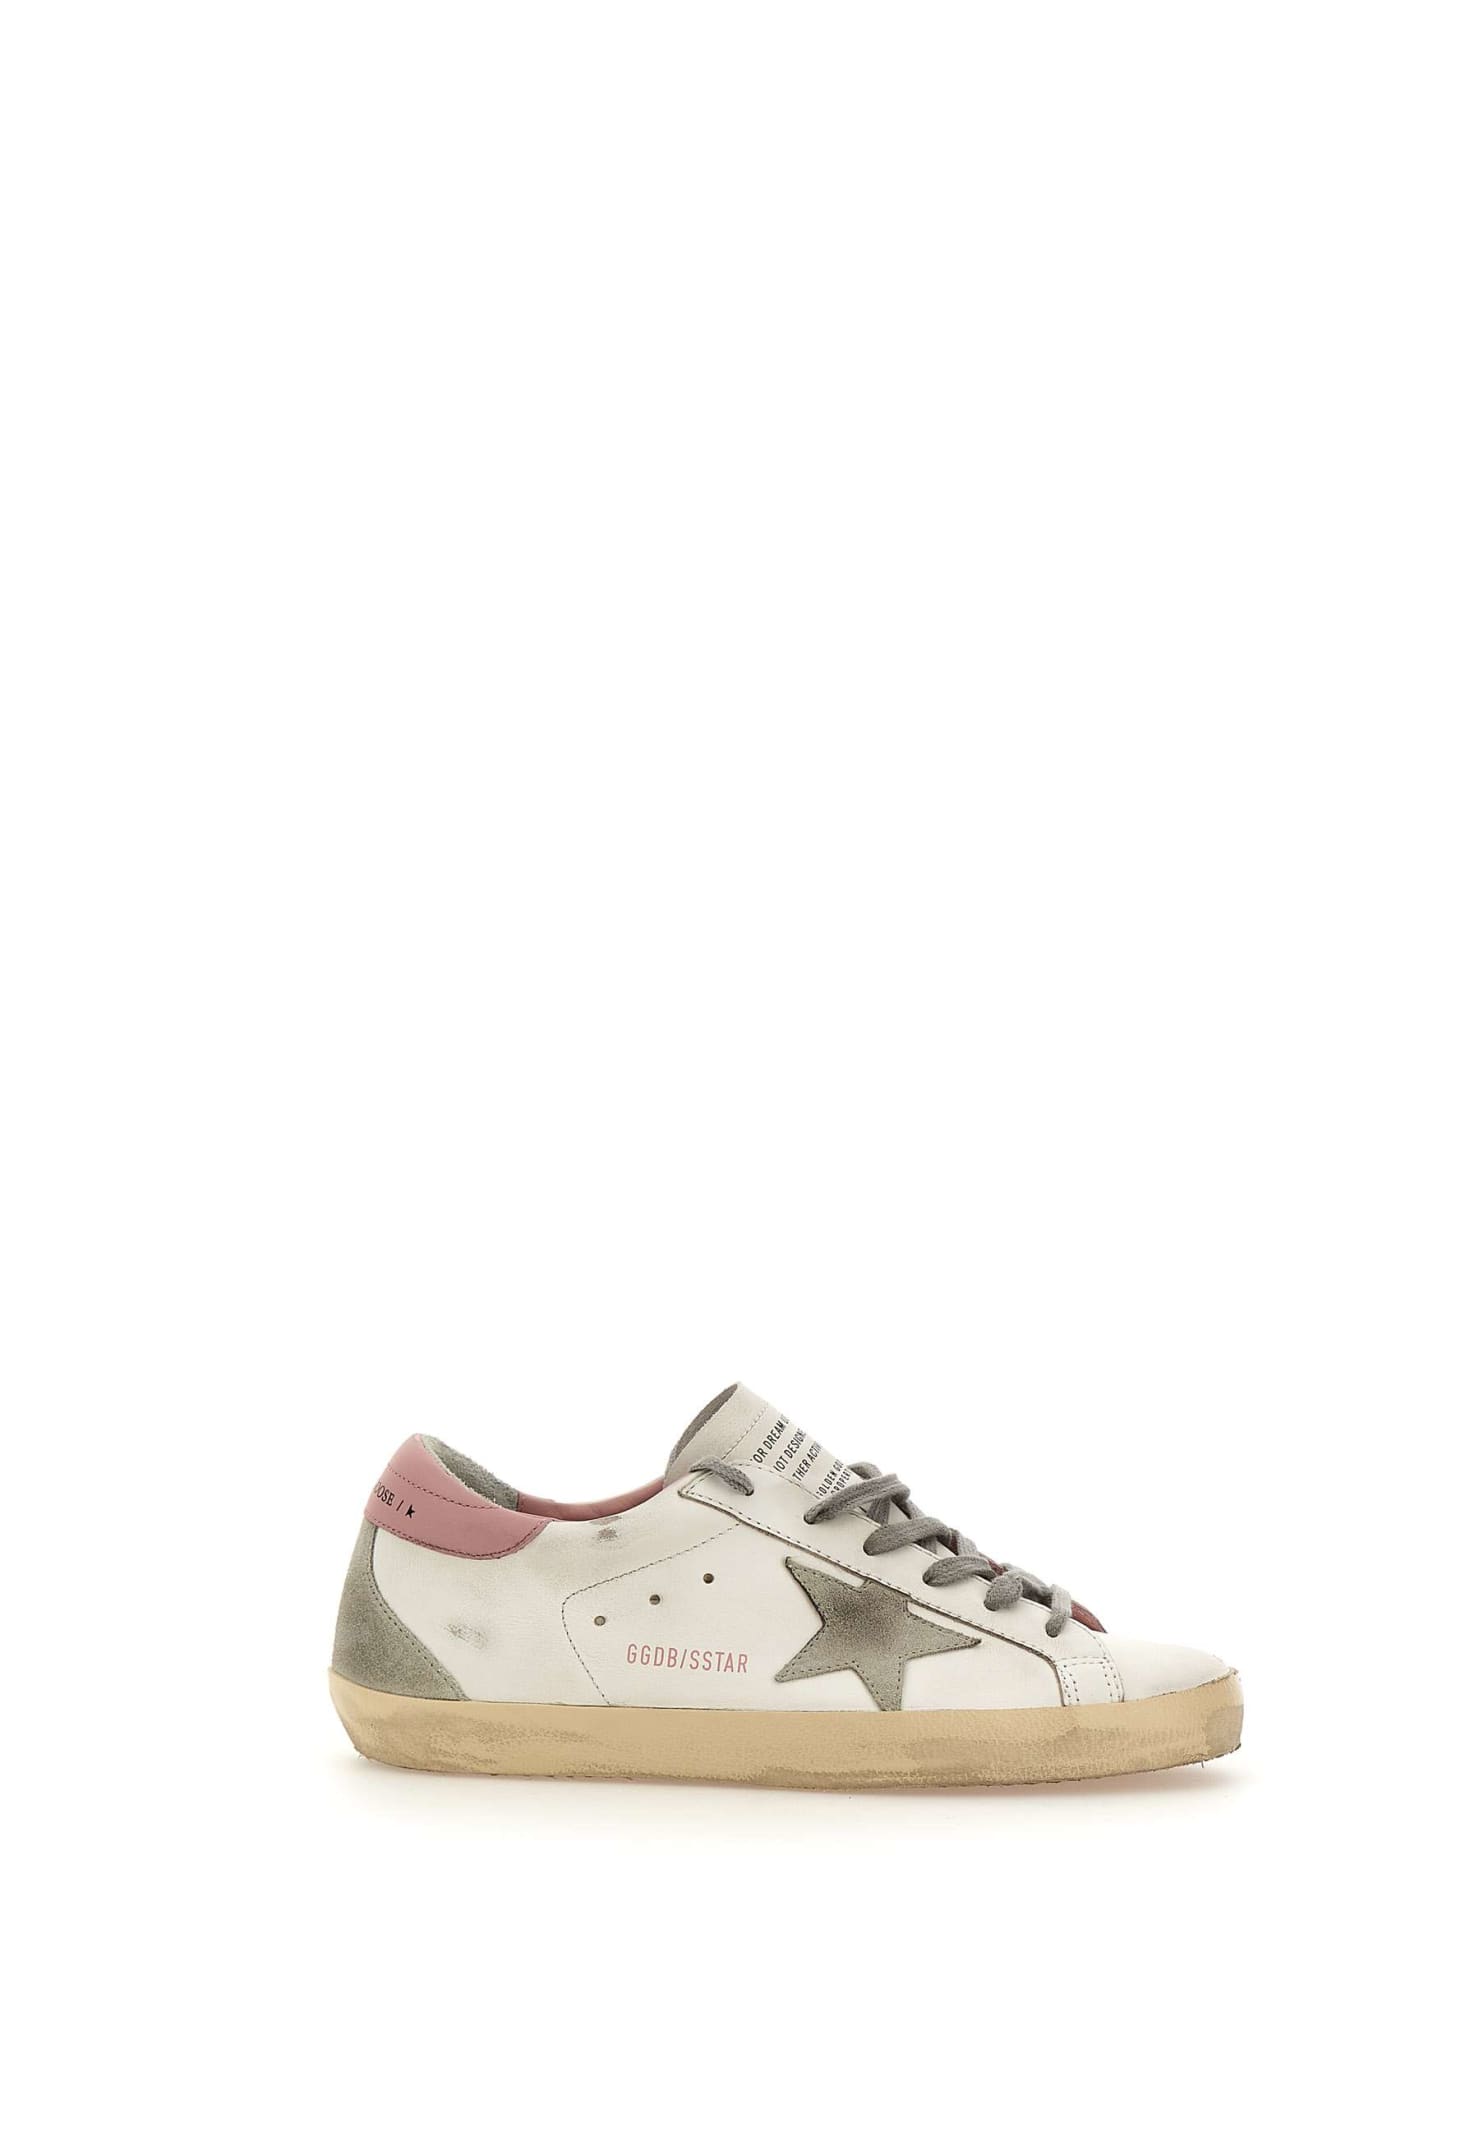 GOLDEN GOOSE SUPER STAR CLASSIC LEATHER SNEAKERS